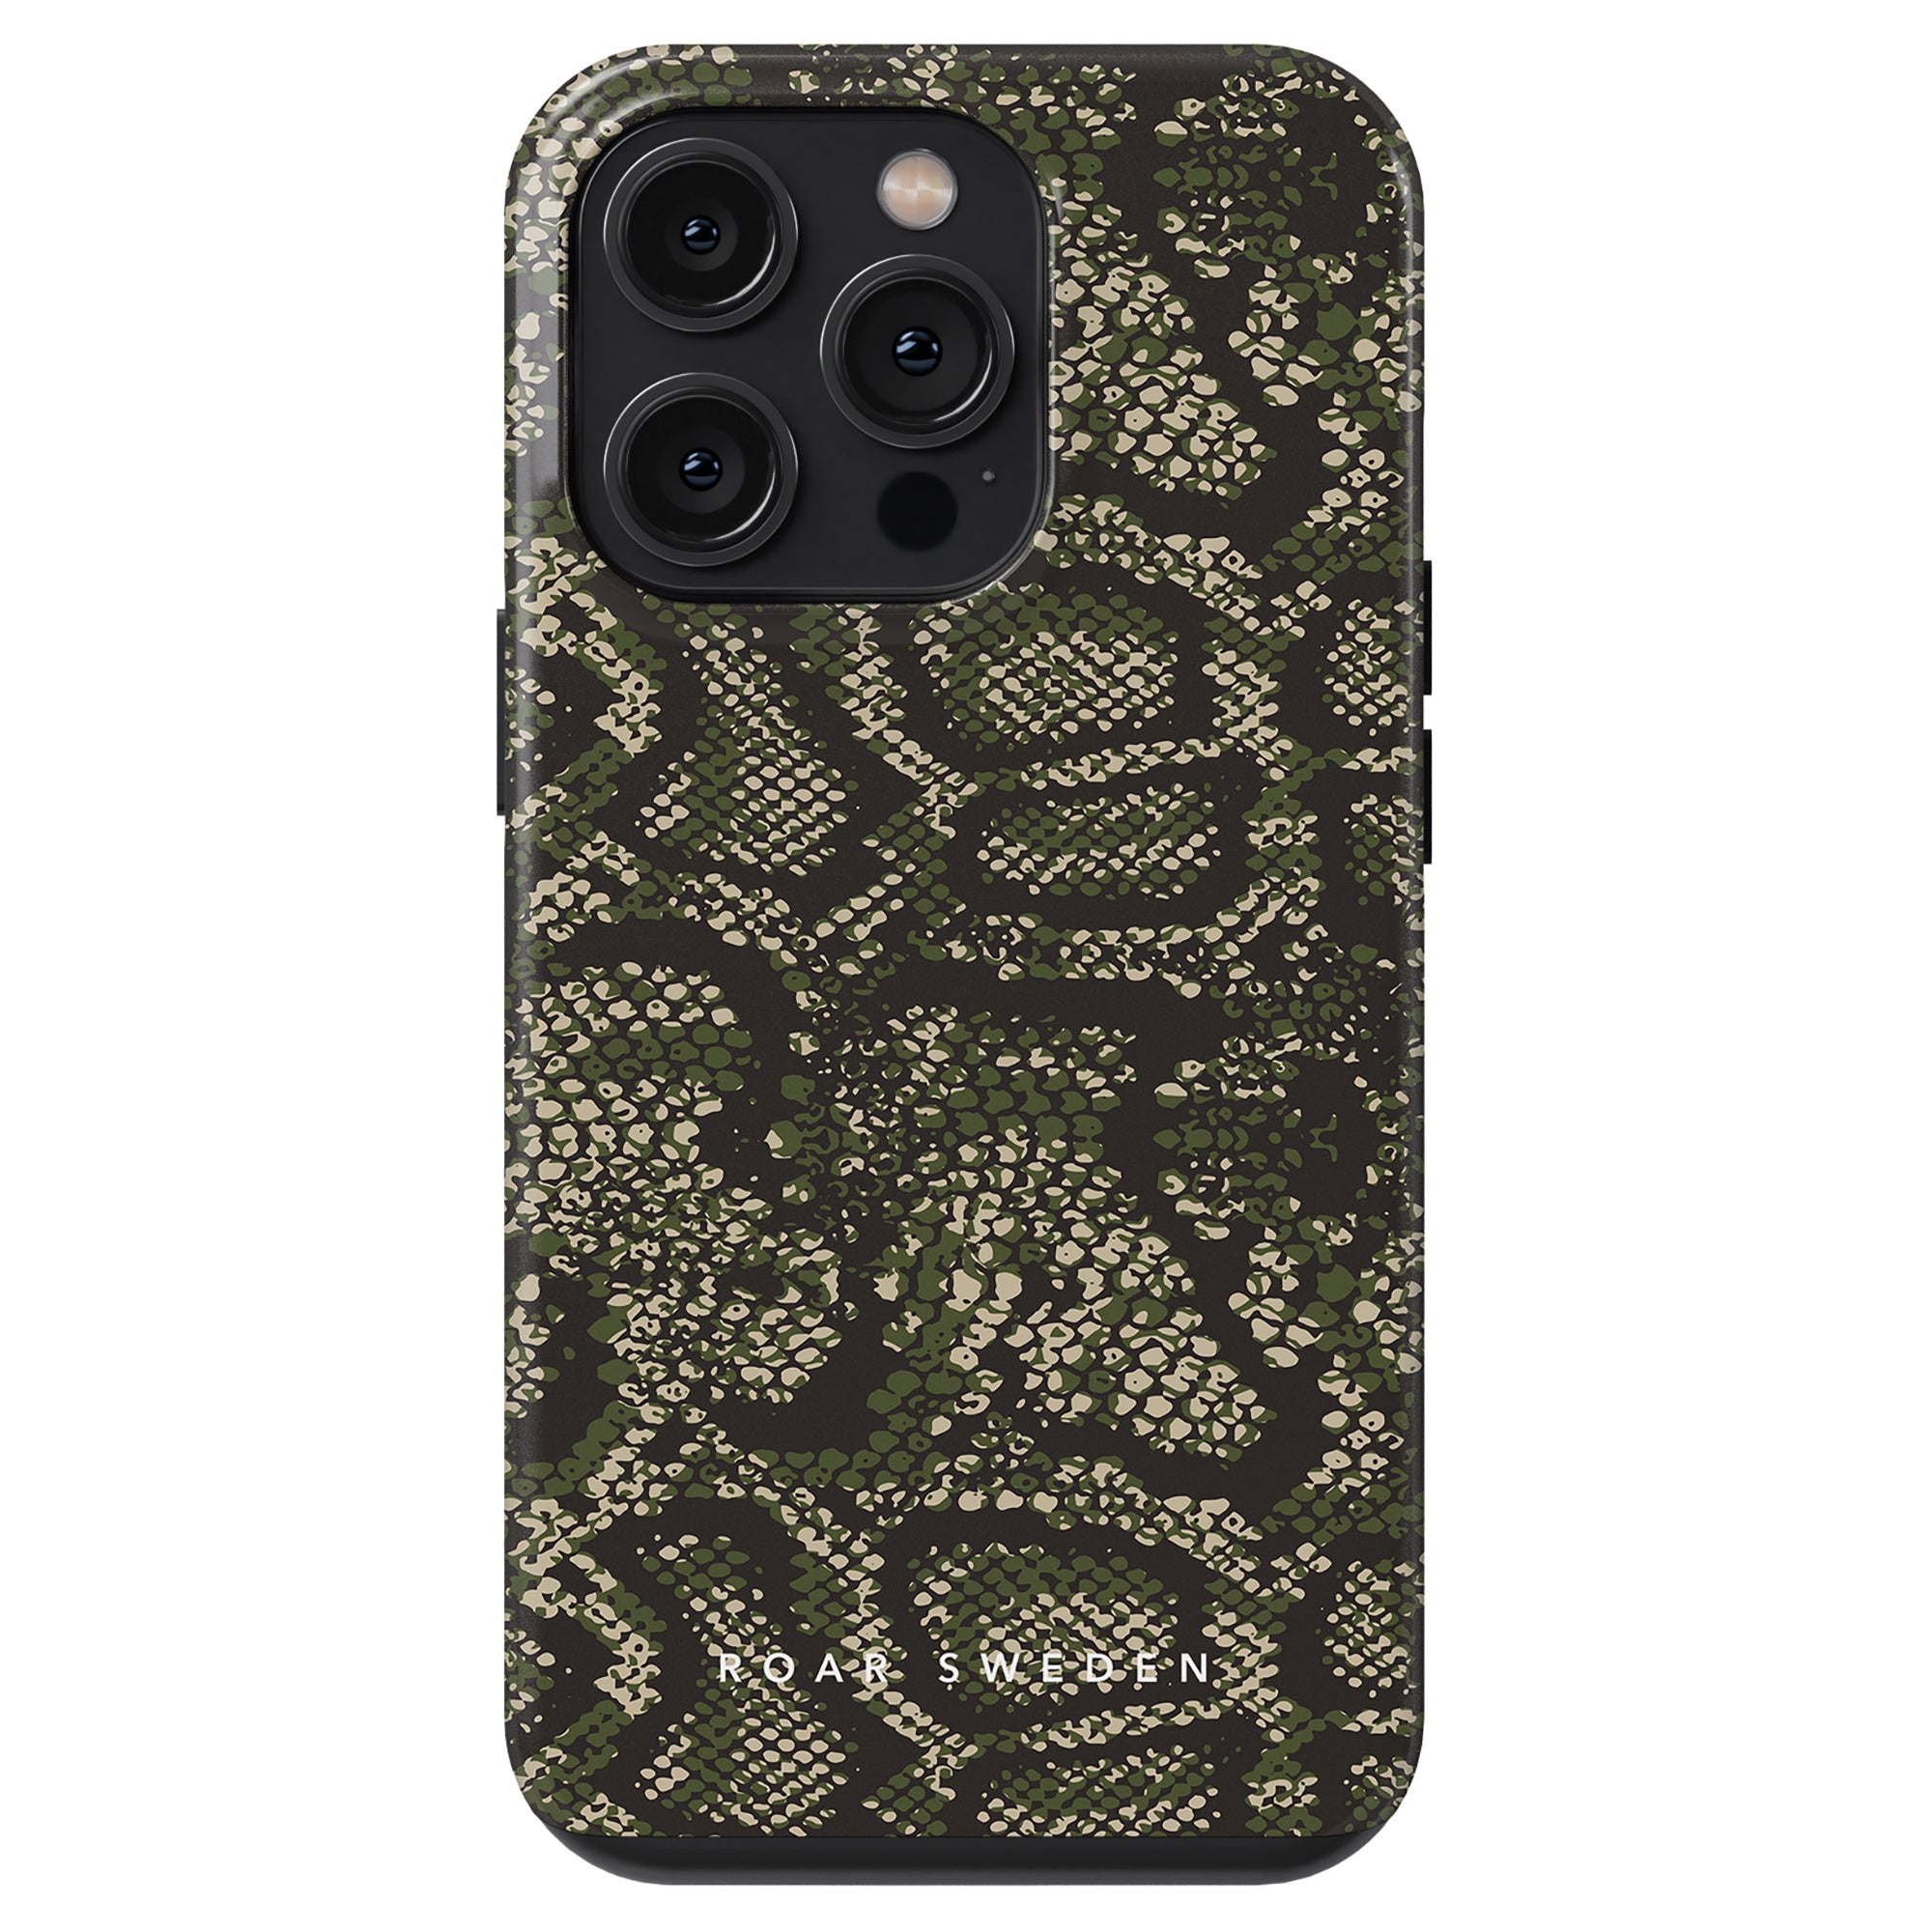 Python print Roar Sweden Camo Snakes - Tufft fodral till iphone 11 pro max.